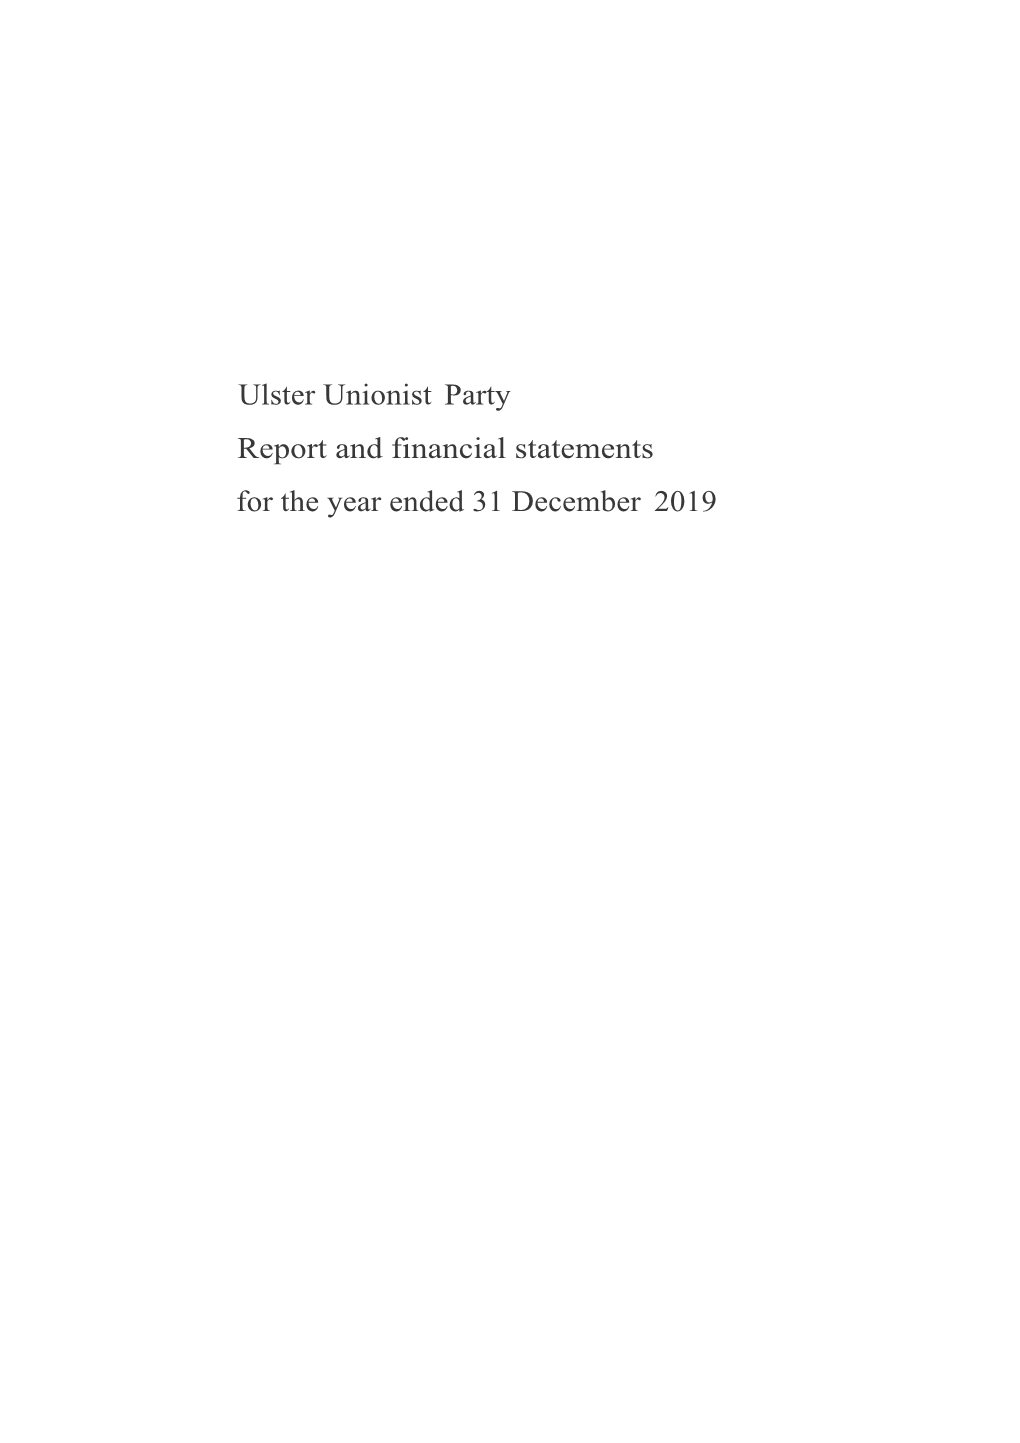 Ulster Unionist Party Report and Financial Statements for the Year